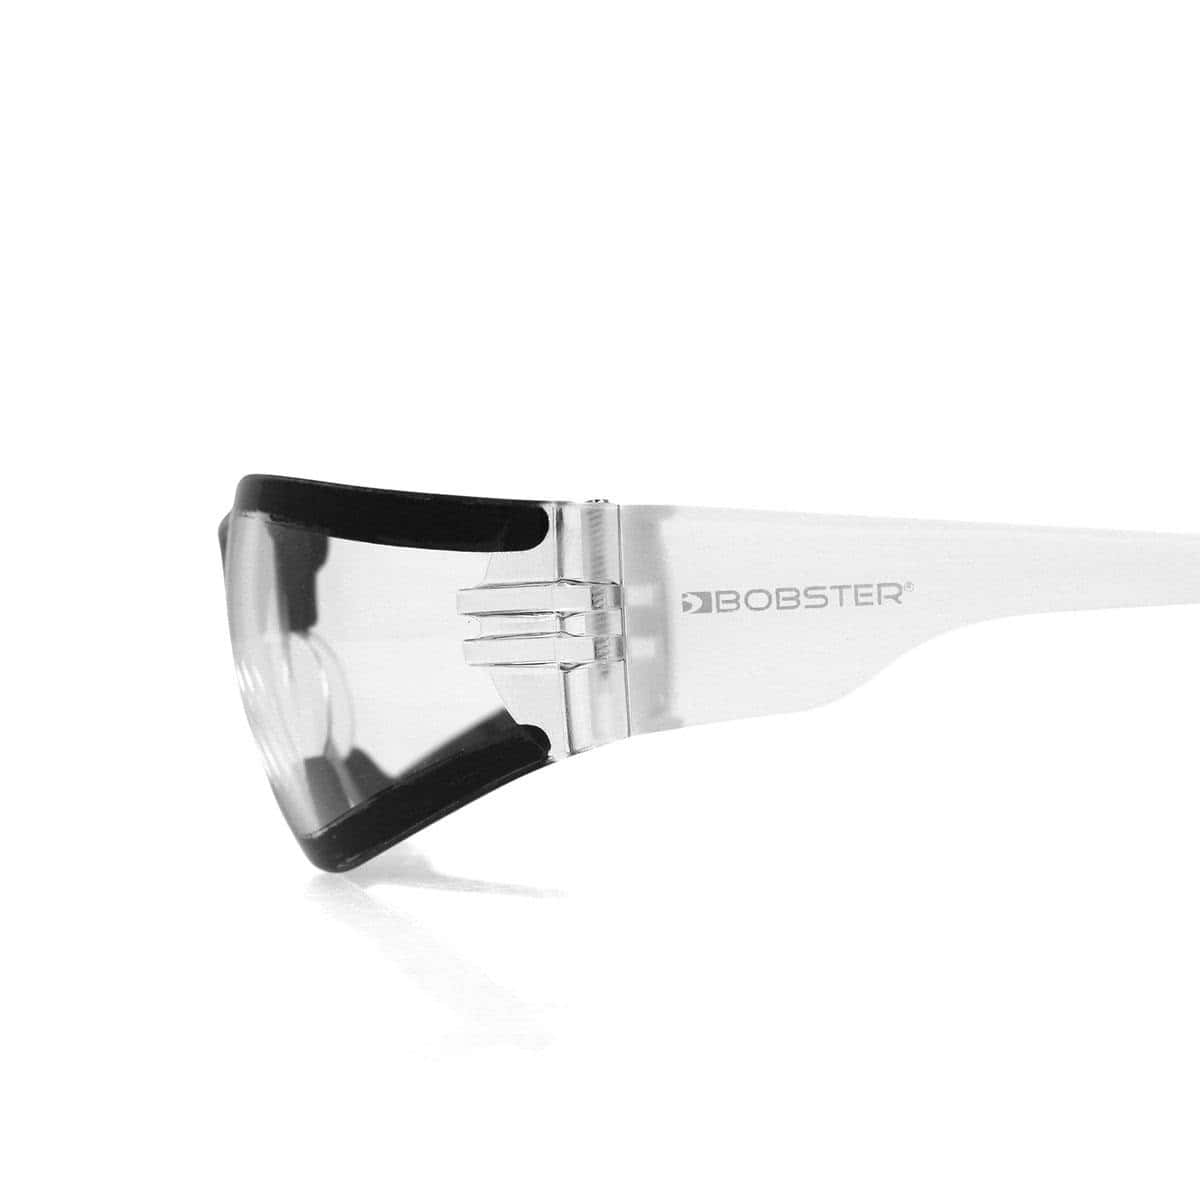 Bobster Shield III Sunglasses - Clothing & Accessories